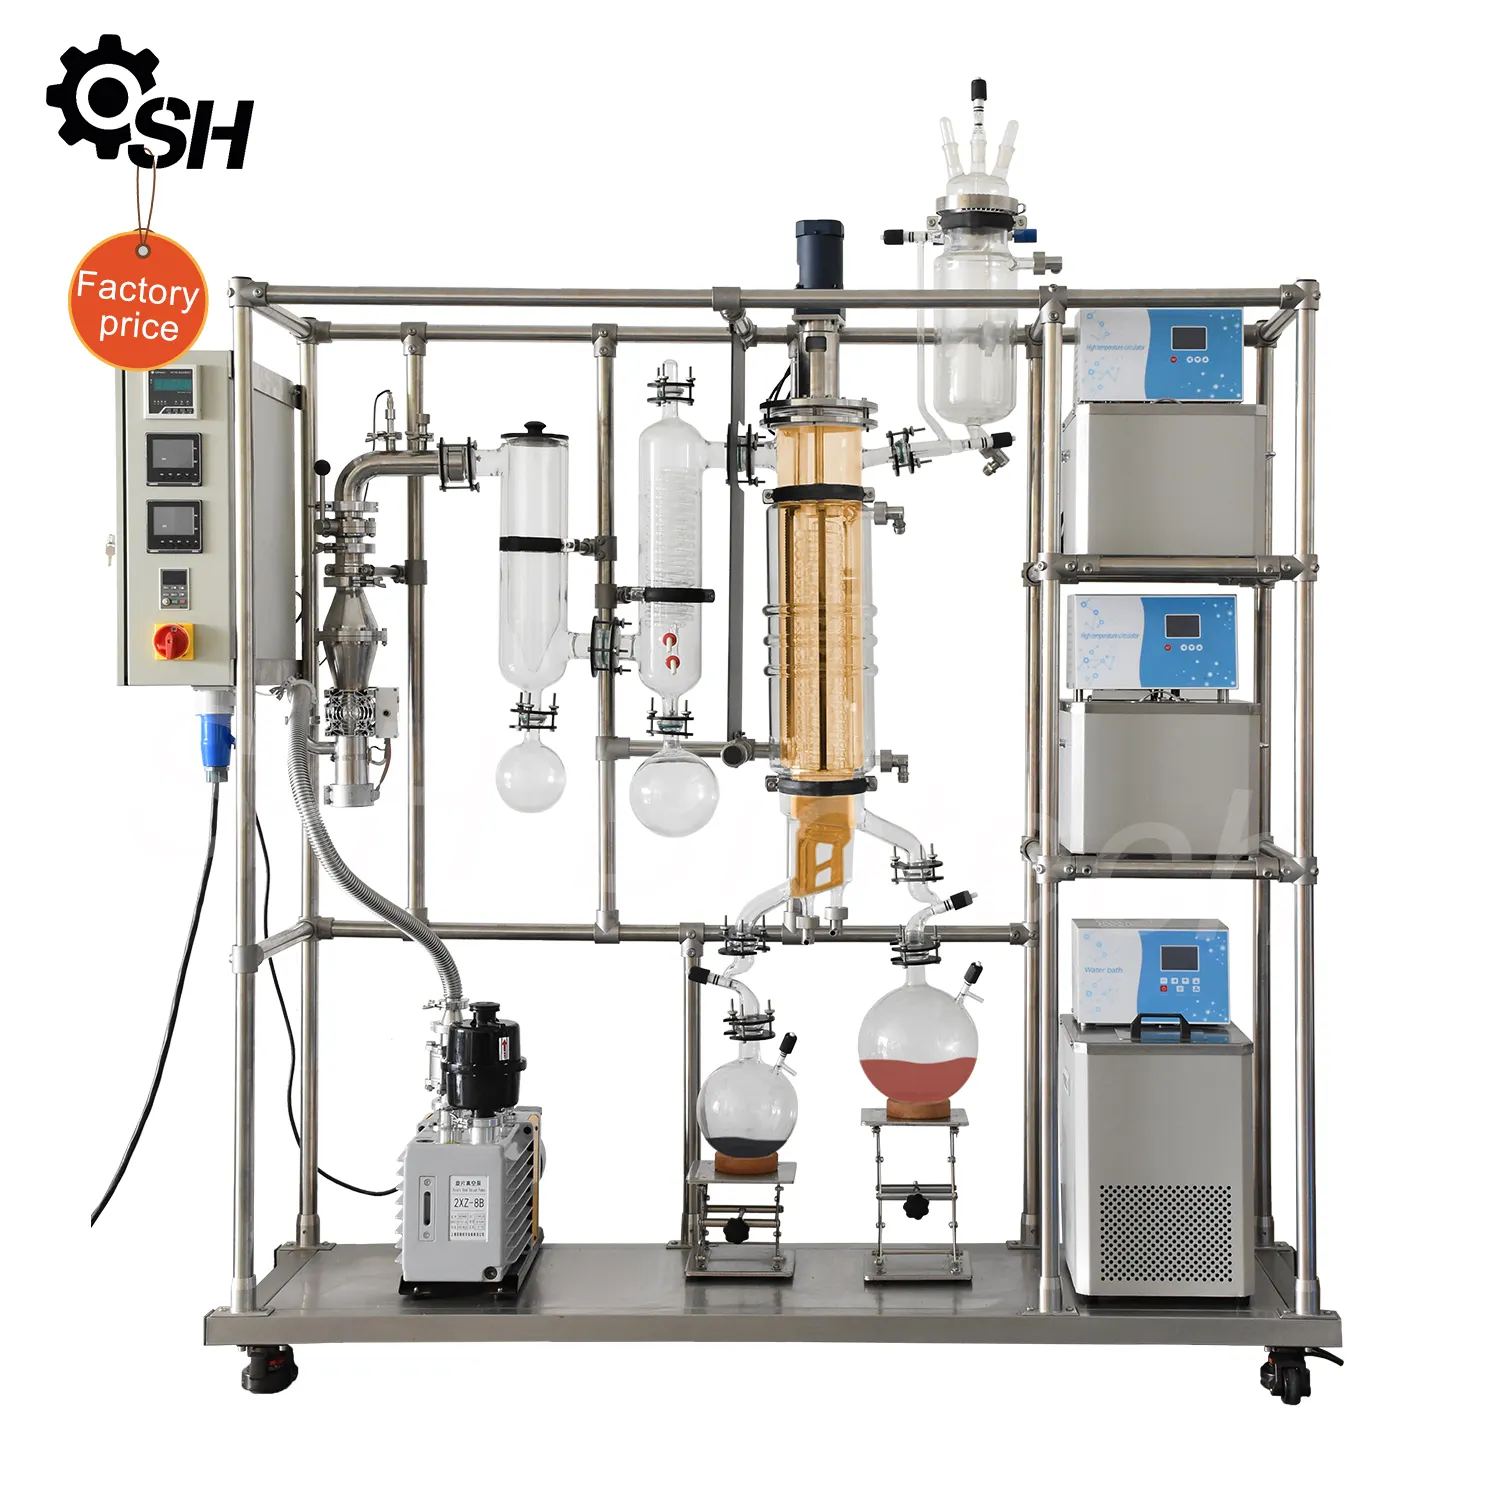 Short range molecular still small-scale pilot type essential oil extraction equipment device